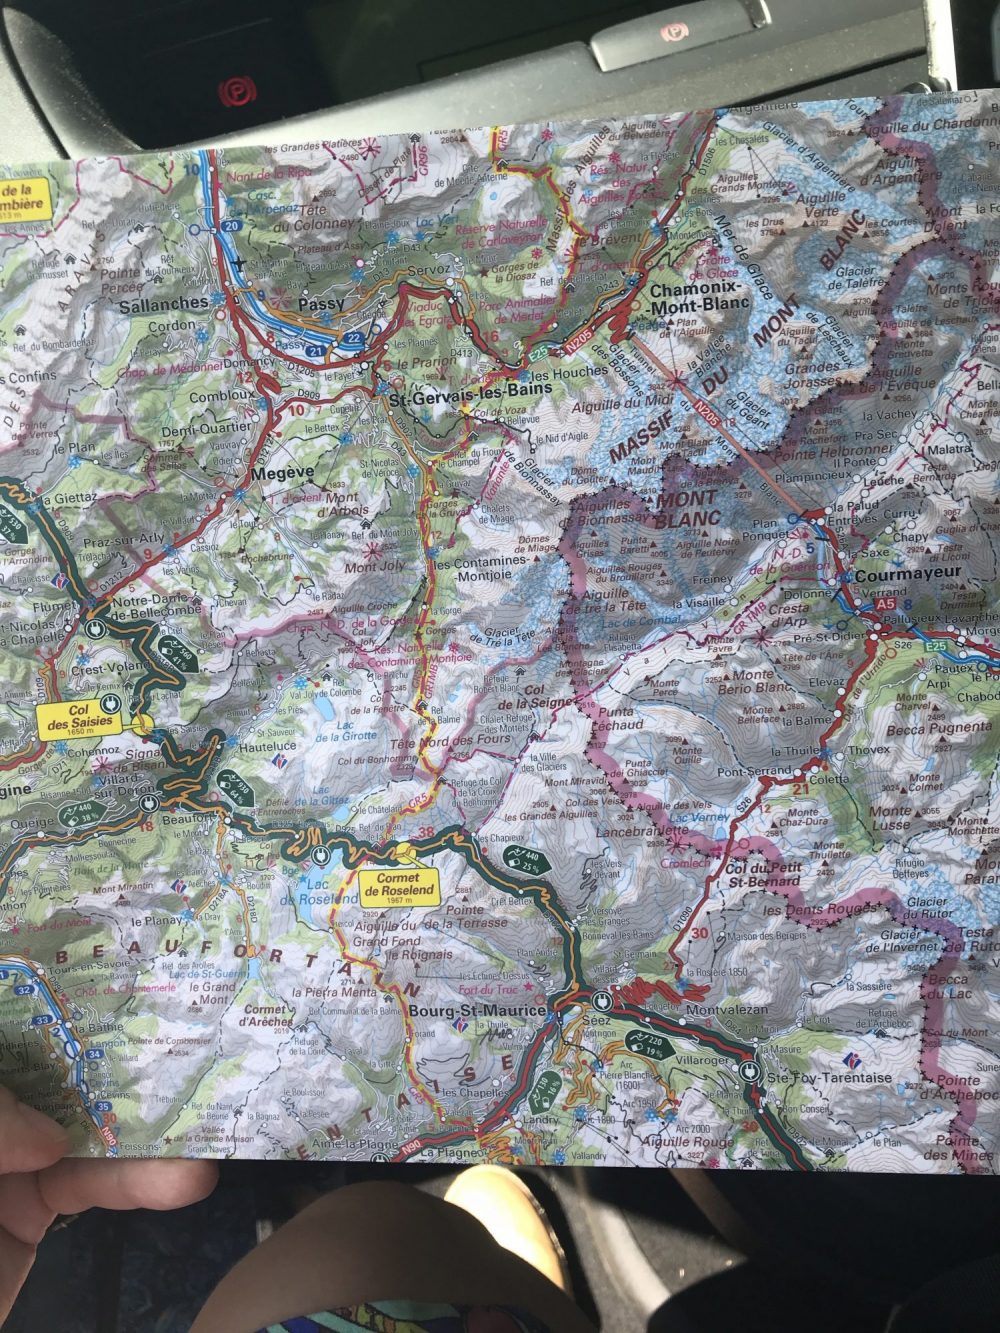 How adventures start - with a good map. The IGN Route des Grandes Alpes. Our Route des Grandes Alpes to cross from France into Italy.